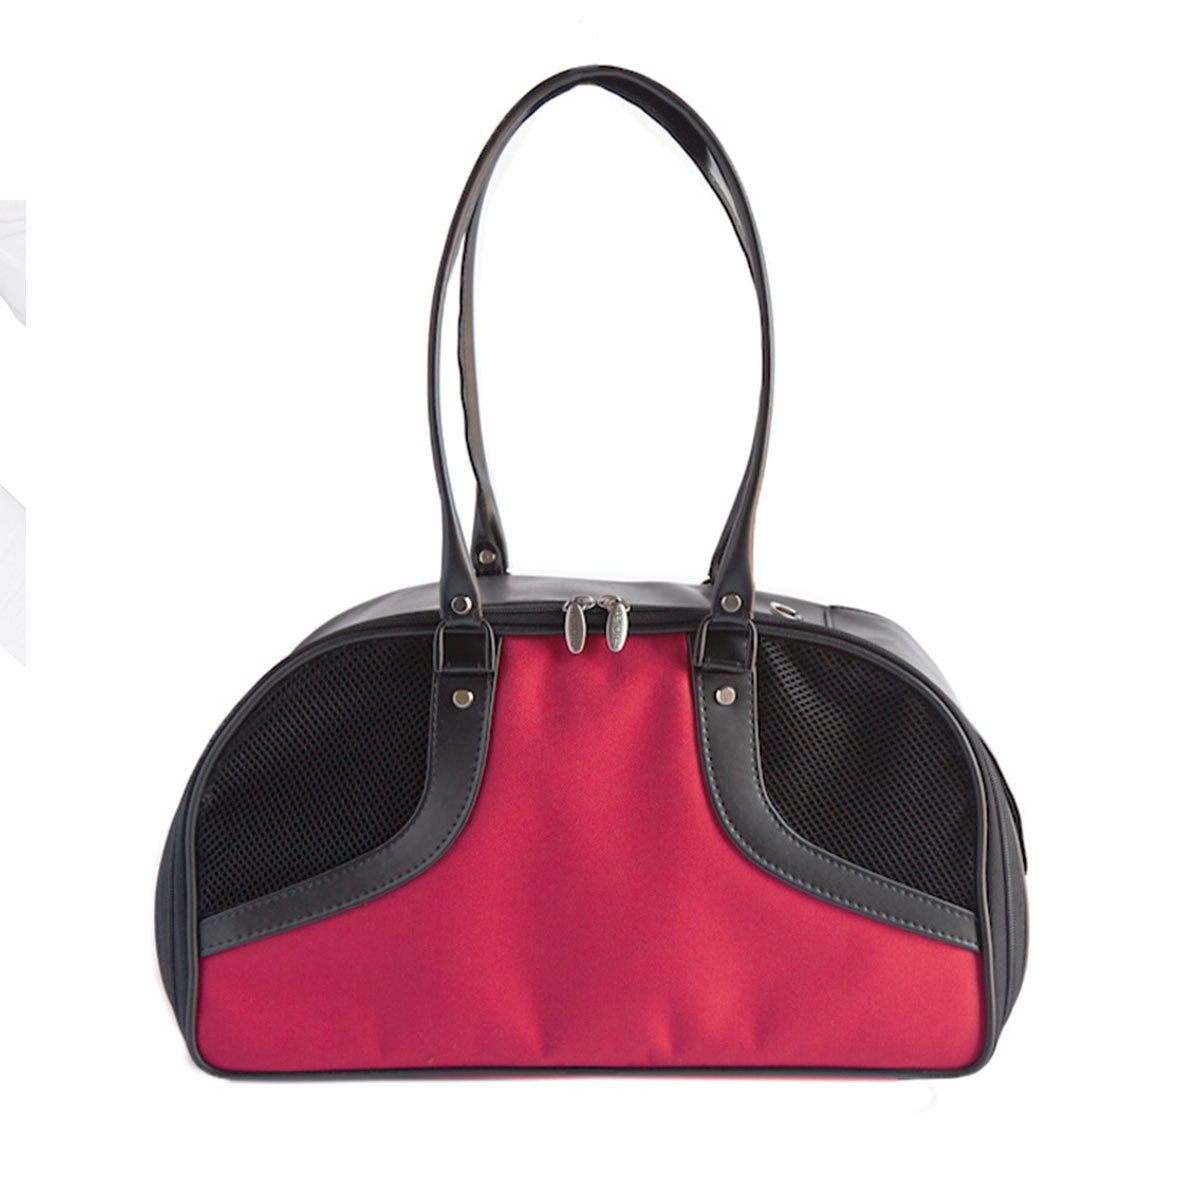 Roxy Pet Carrier - Red & Black | Pawlicious & Company